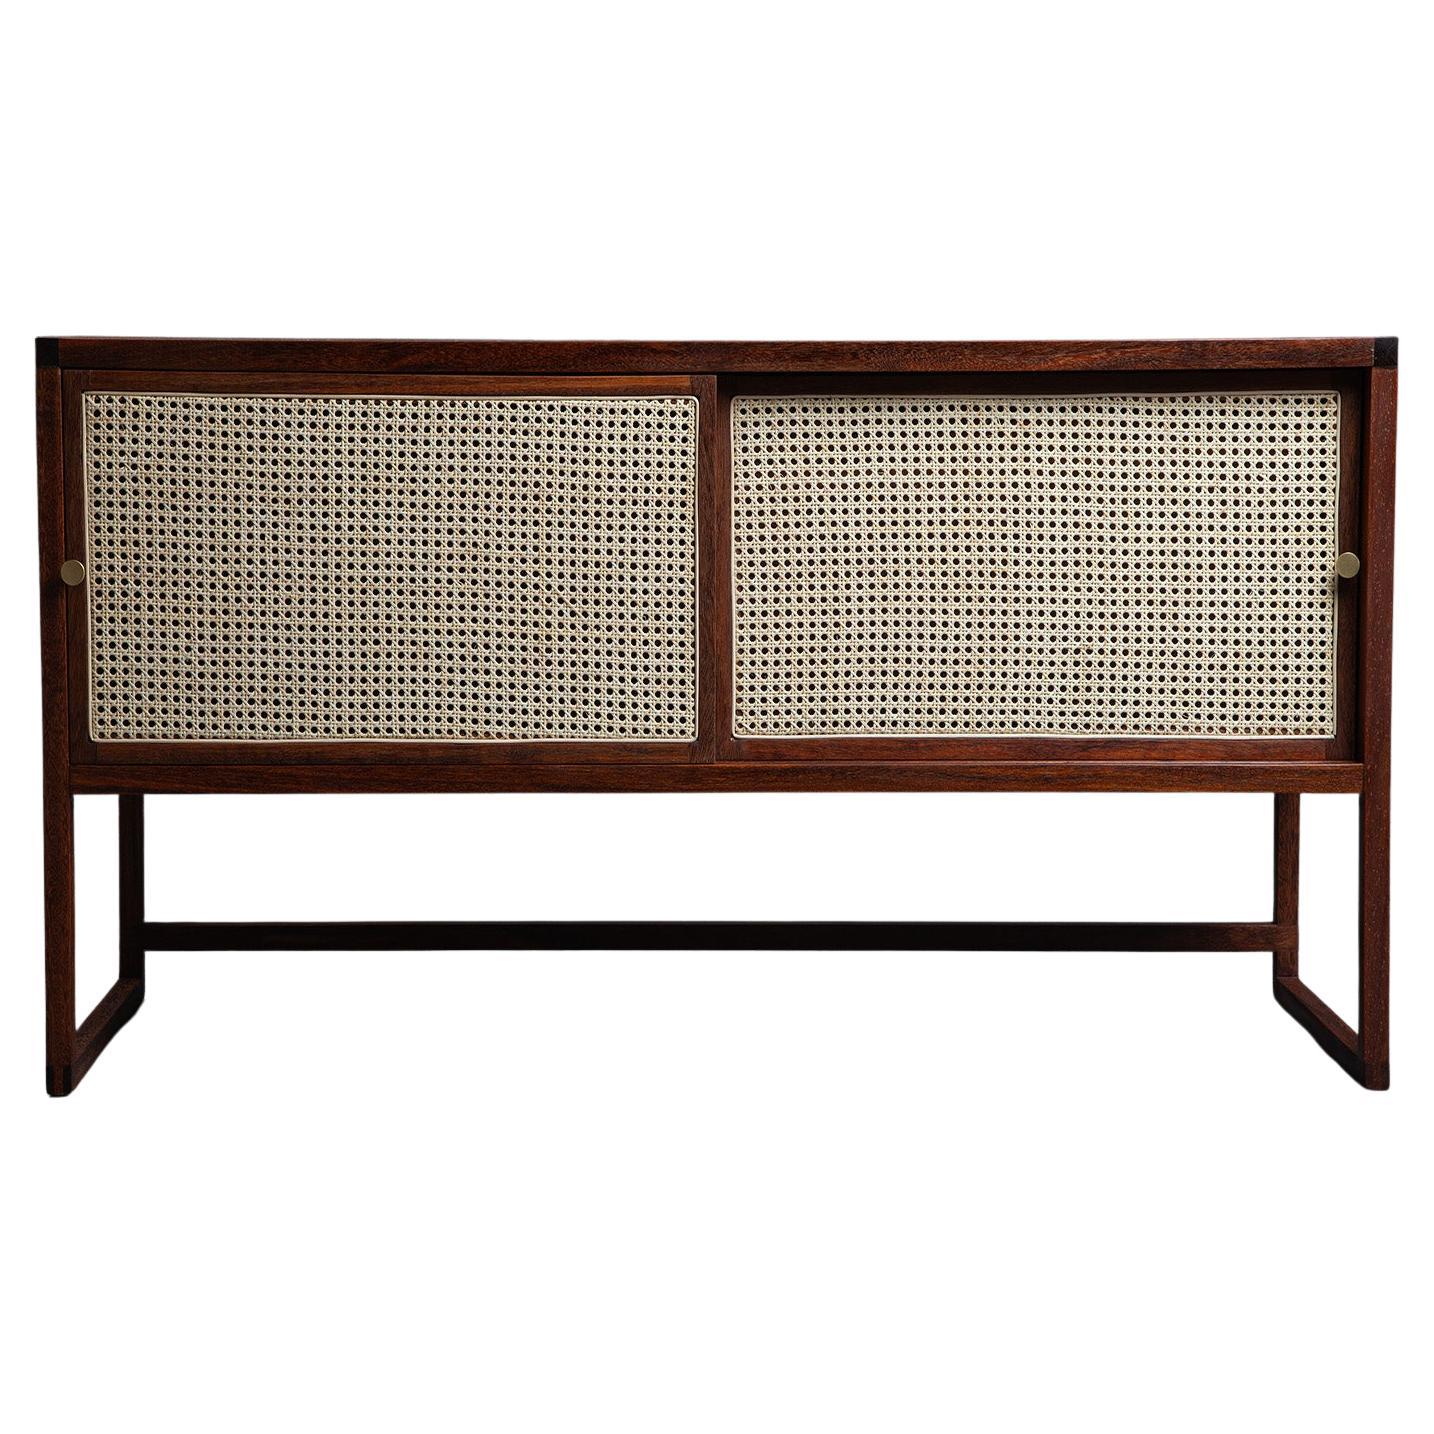 The Square Sideboard, Brazilian Solid Wood and Straw Design by Amilcar Oliveira